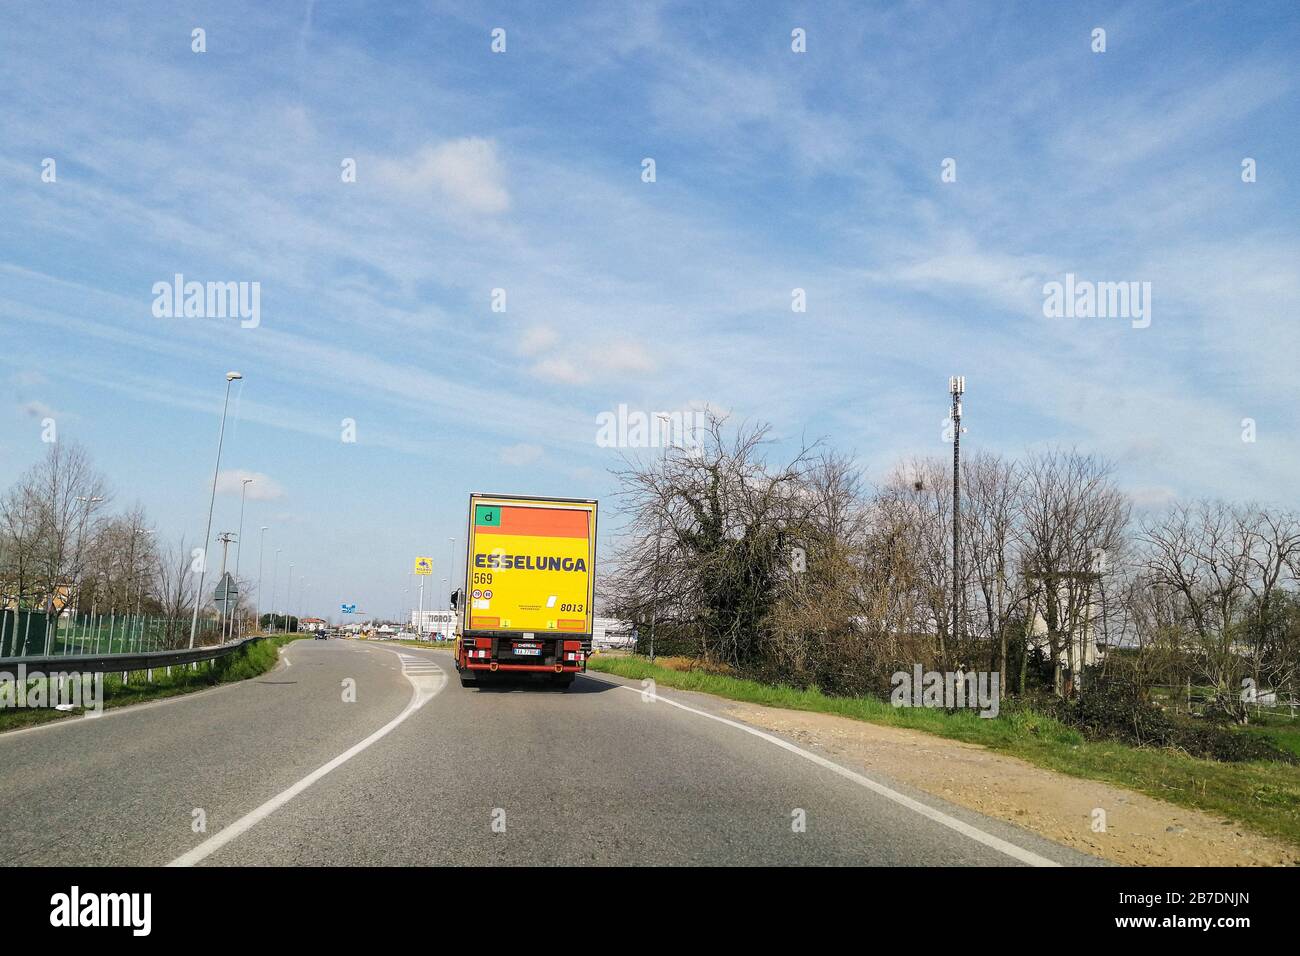 Italy, Inveruno, truck transporting food supplies to supermarkets Stock Photo